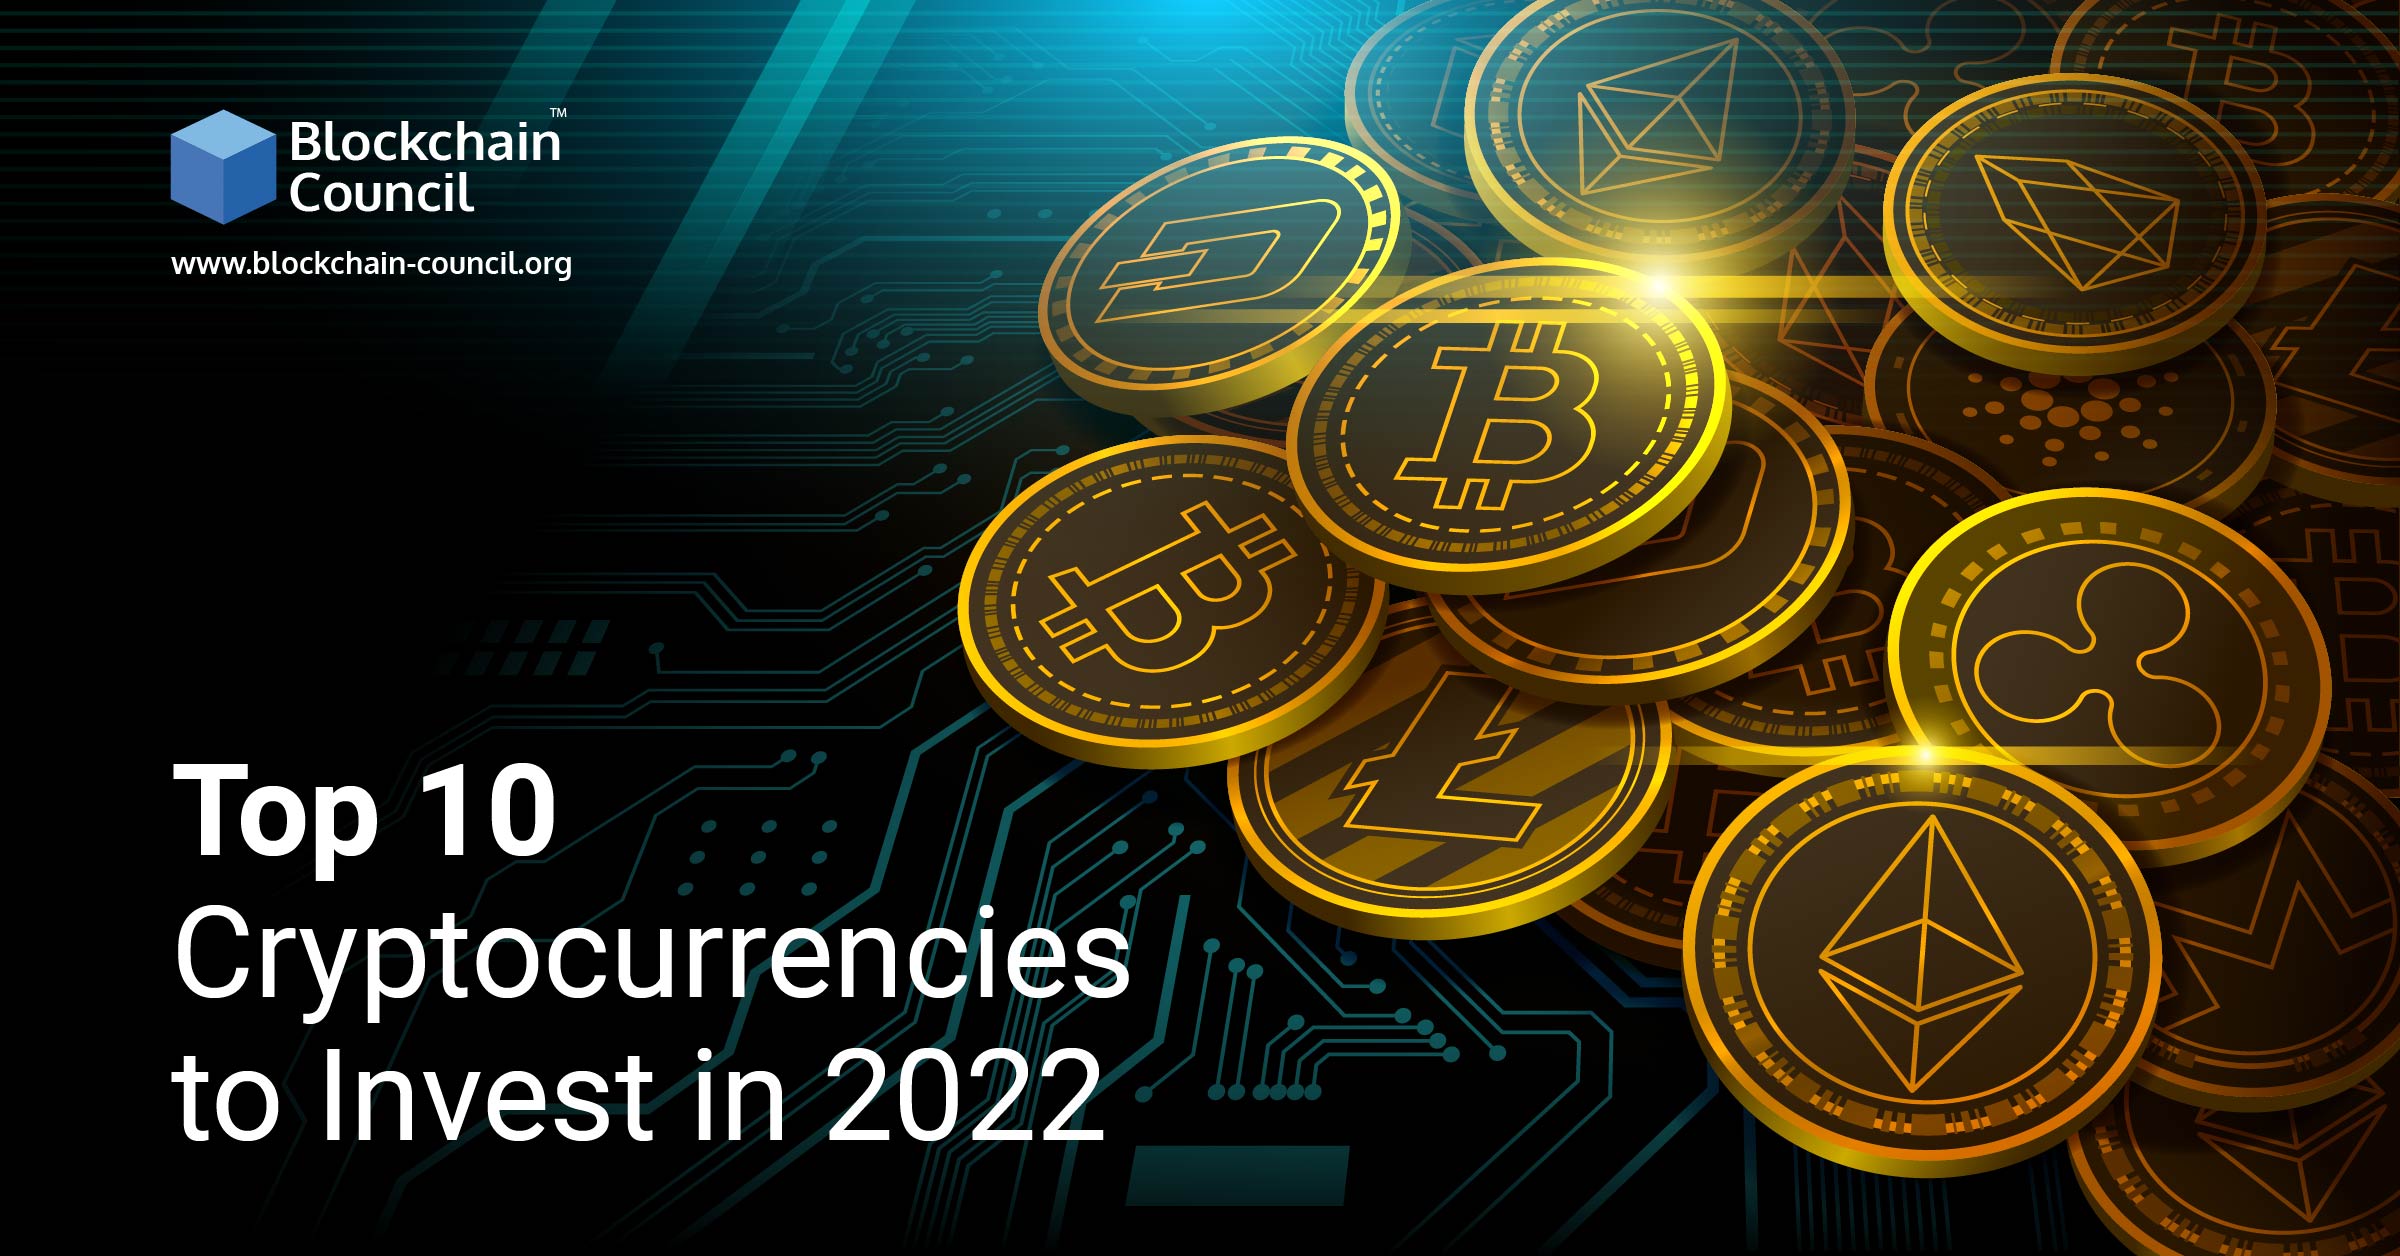 Top 10 Cryptocurrencies to Invest in 2022